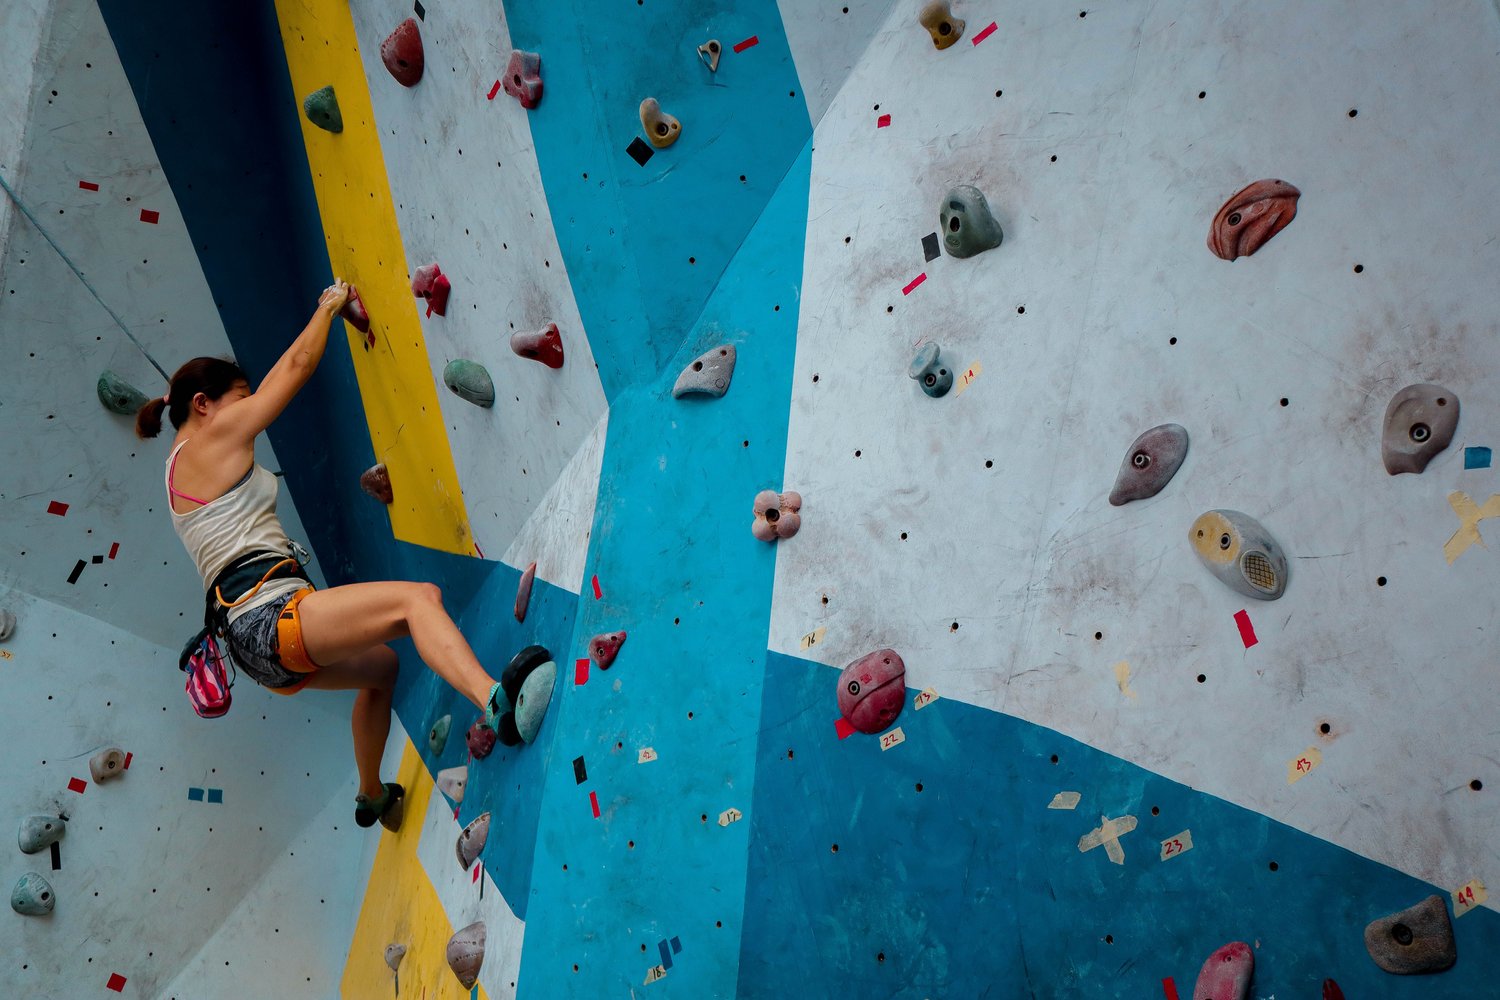 A person climbing on a colorful indoor rock wall